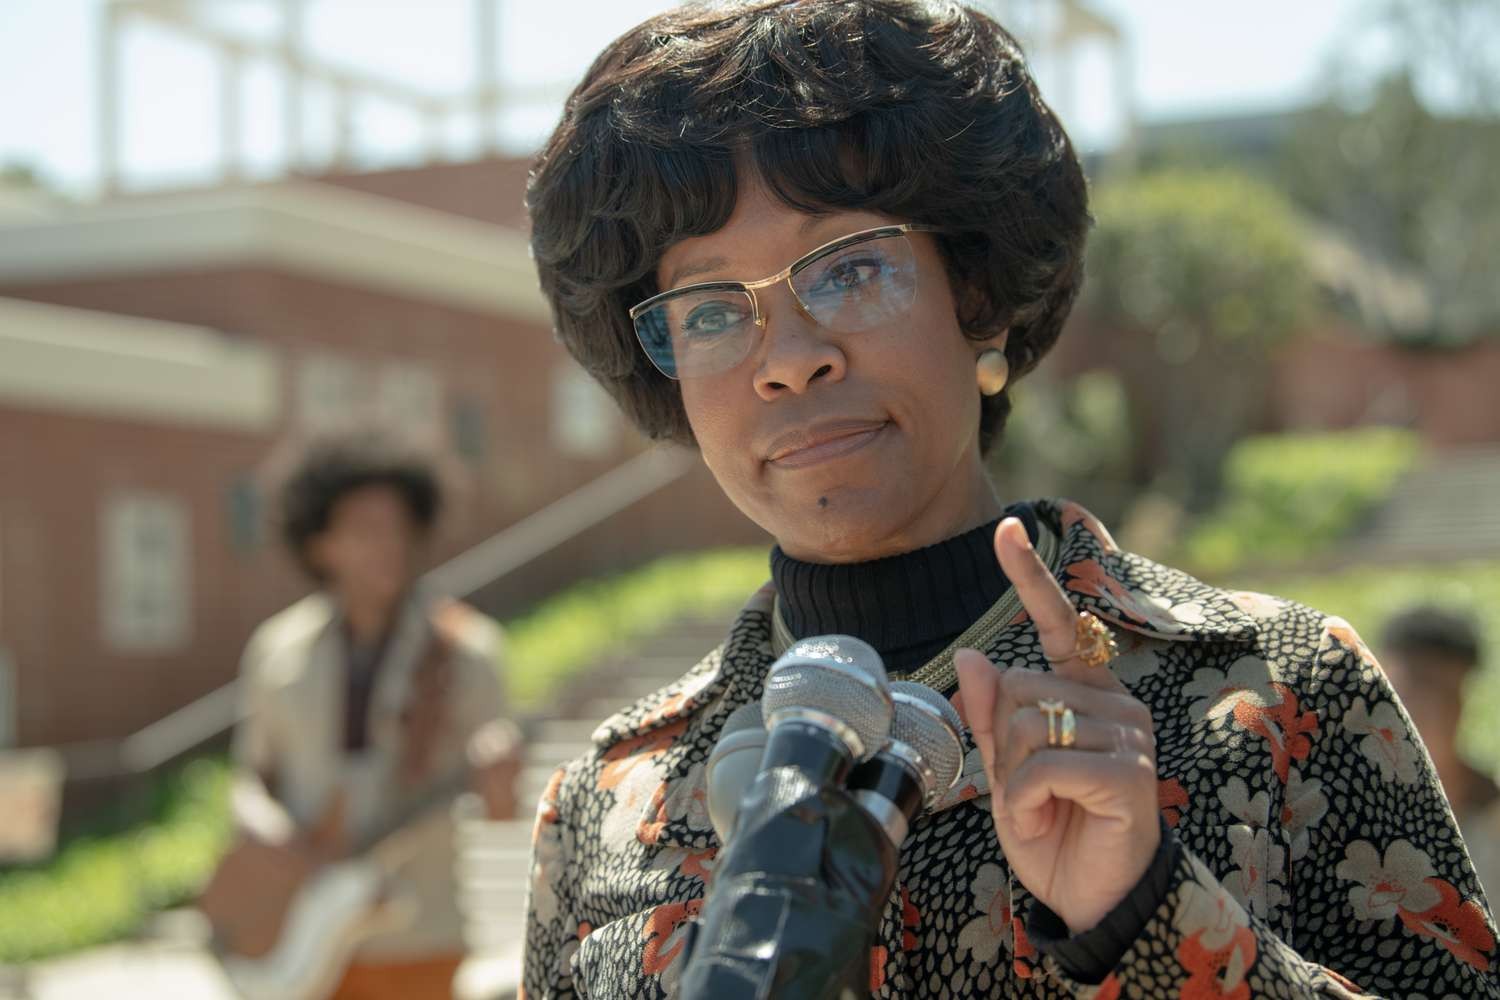 Regina King as Shirley Chisolm in Shirley